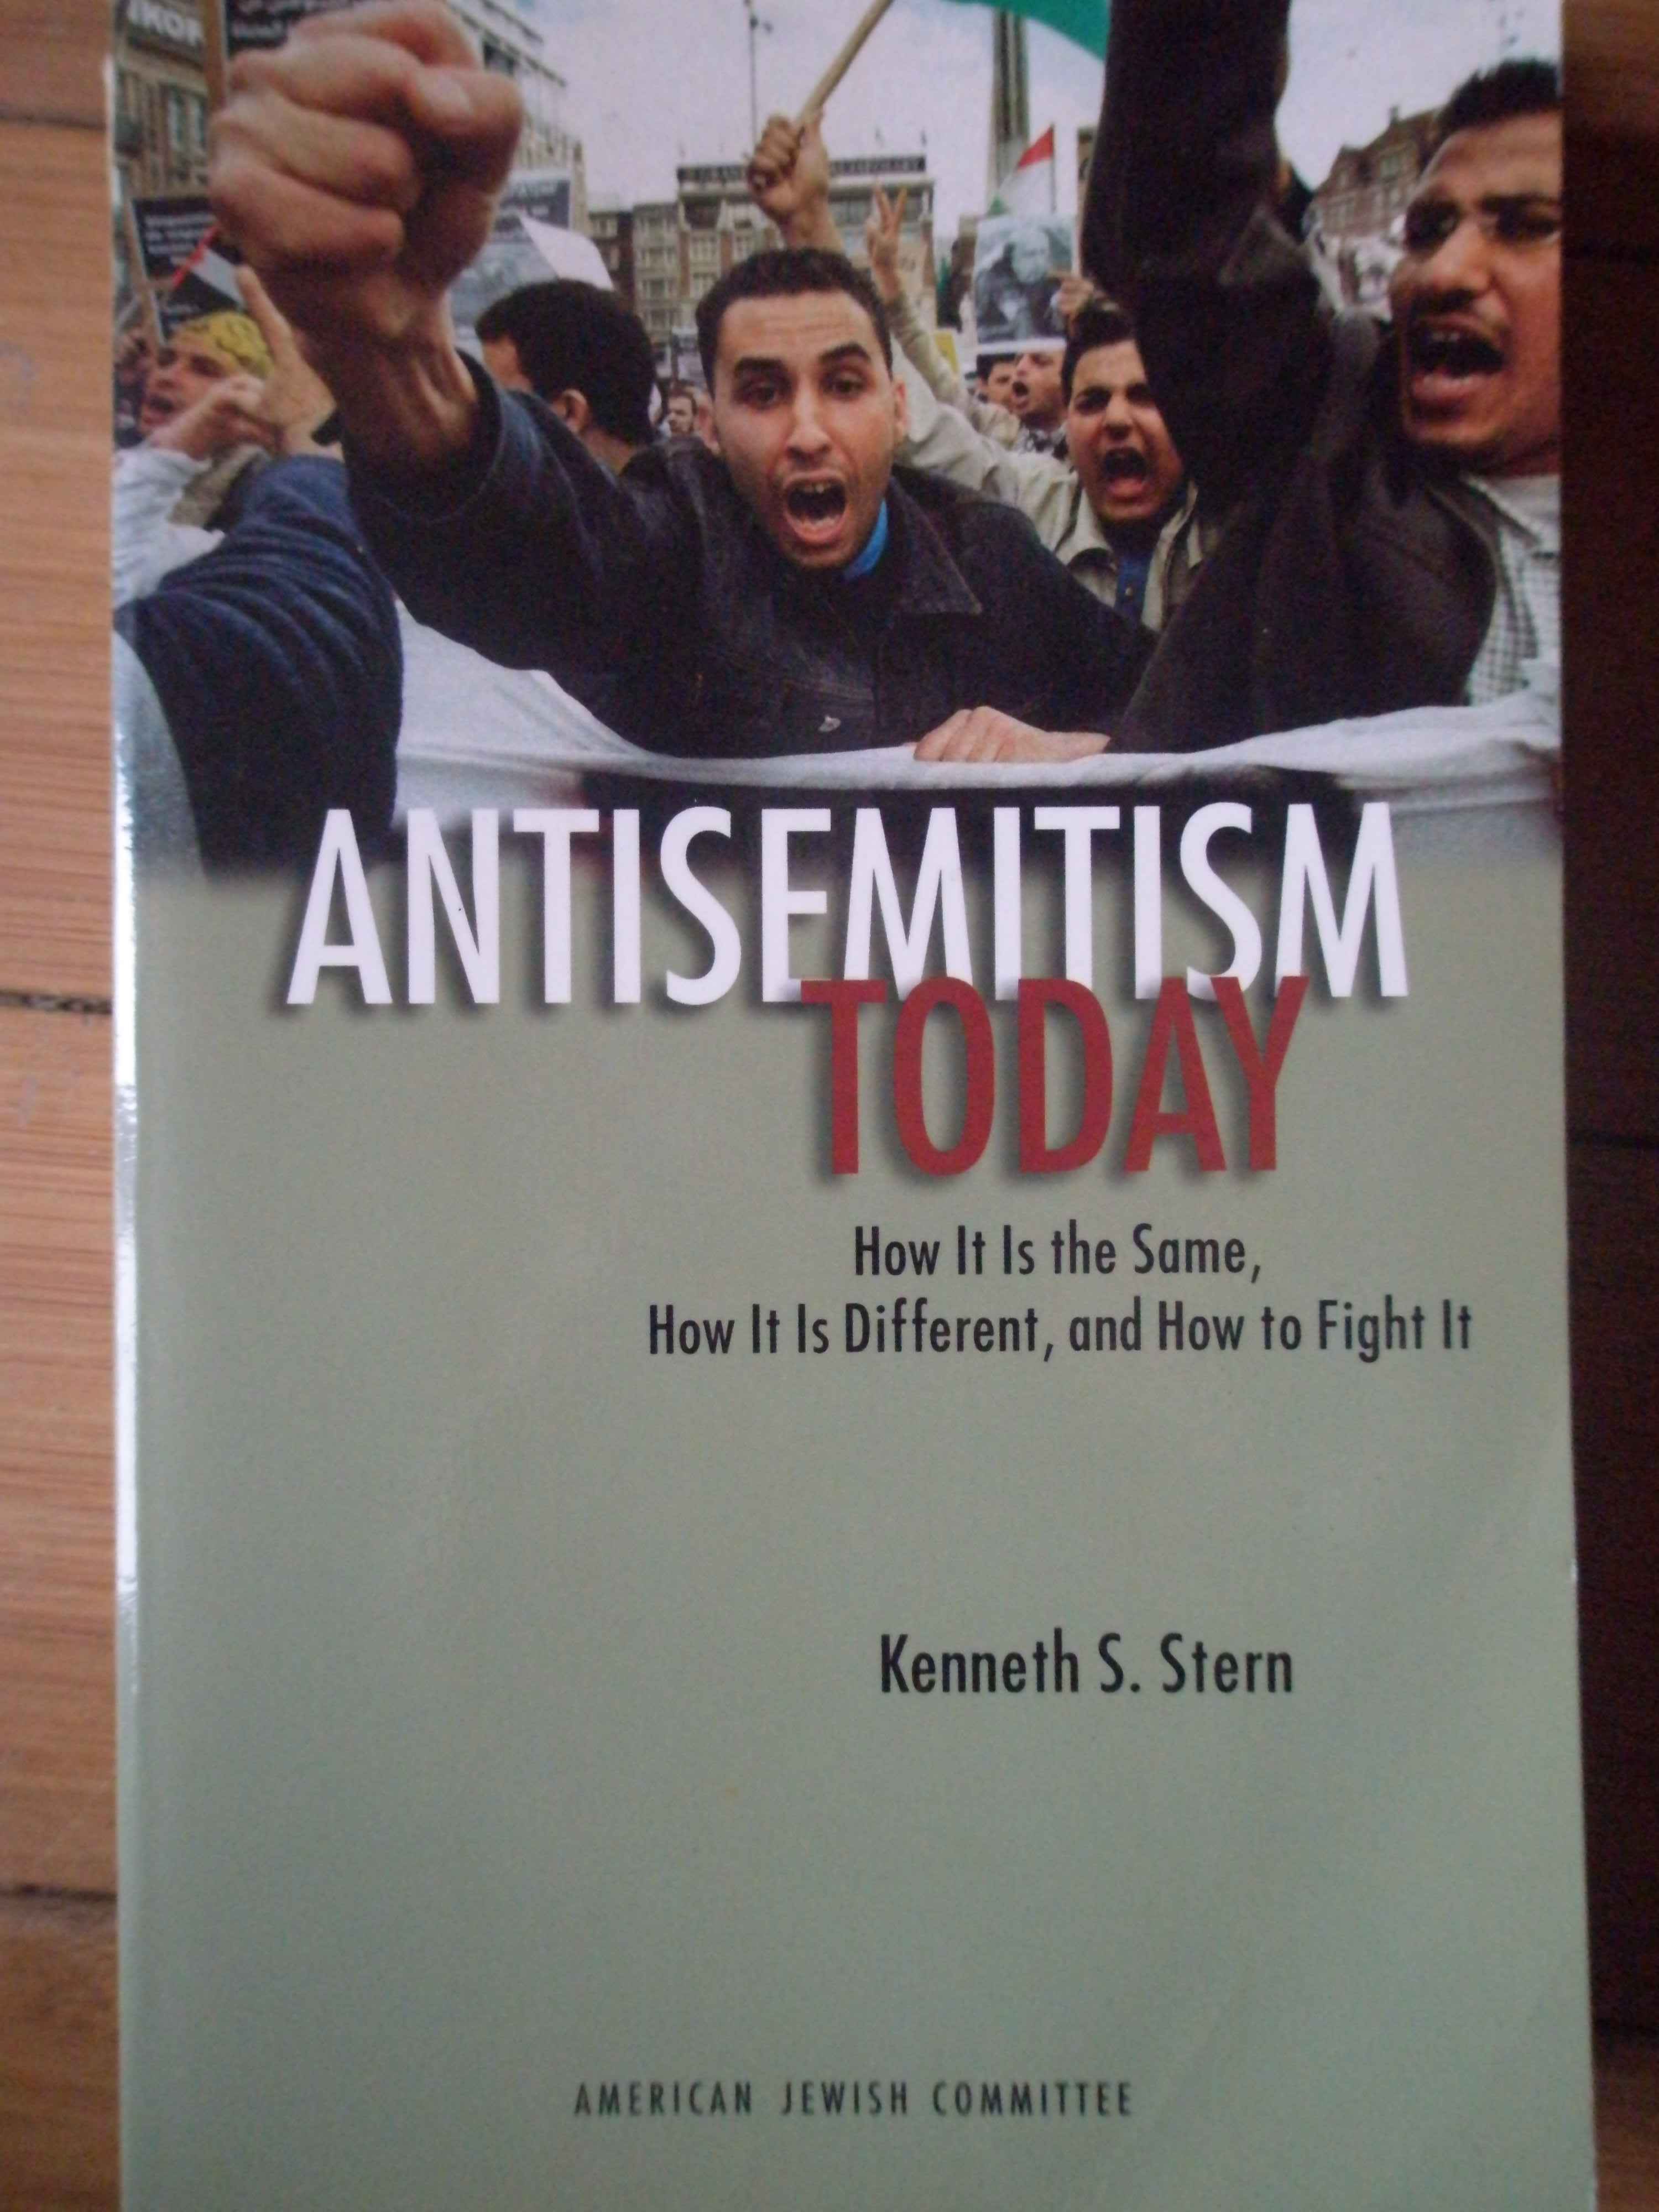 antisemitism today                                                                                   kenneth s. stern                                                                                    